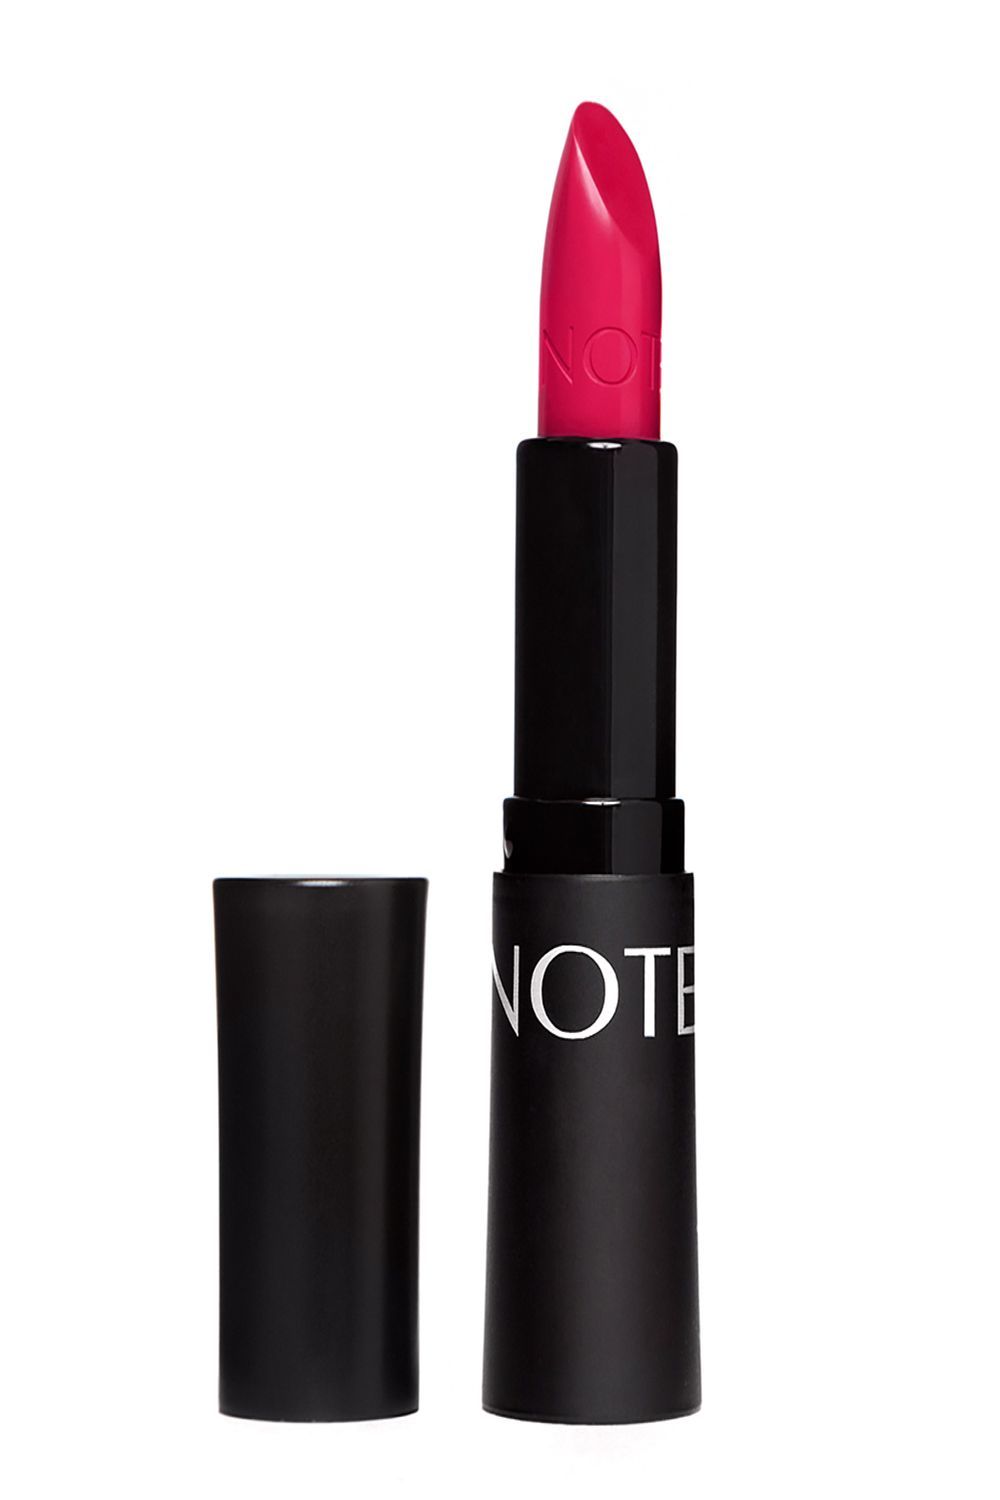 Buy NOTE ULTRA RICH COLOR LIPSTICK 16(Pink Topaz) - Purplle